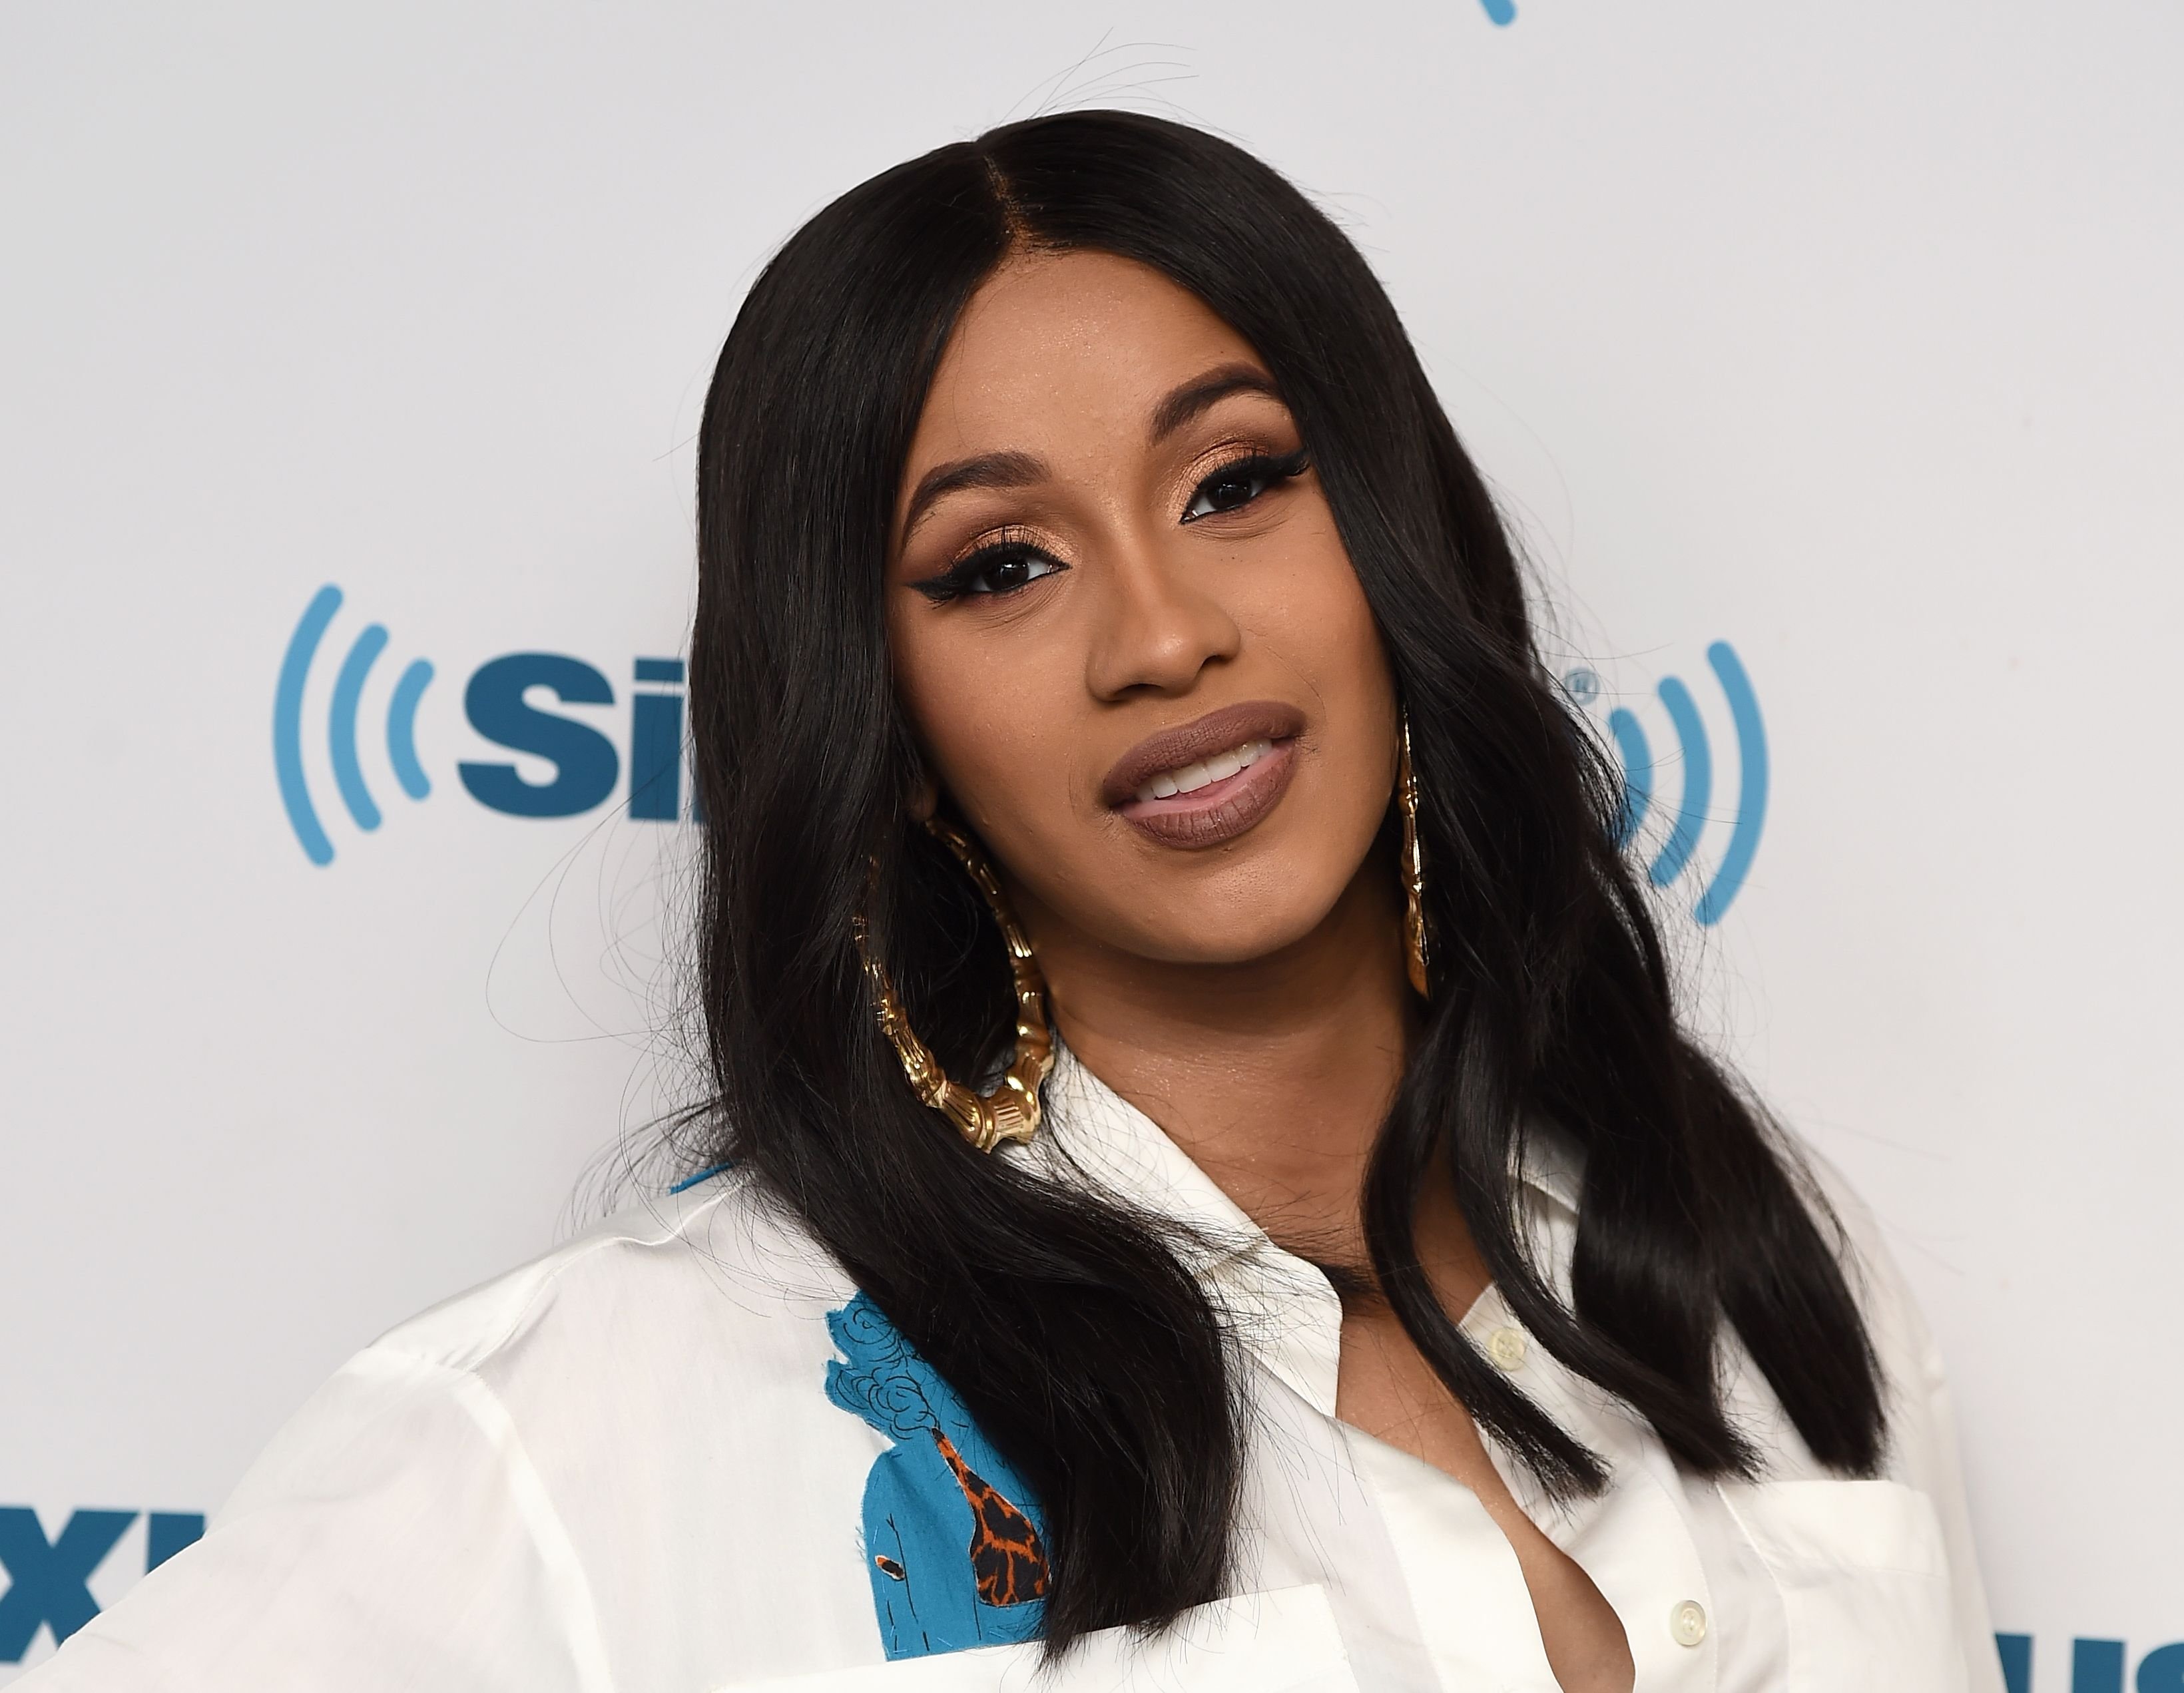 Performing artist Cardi B at the SiriusXM Studios on May 9, 2018 | Photo: Getty Images